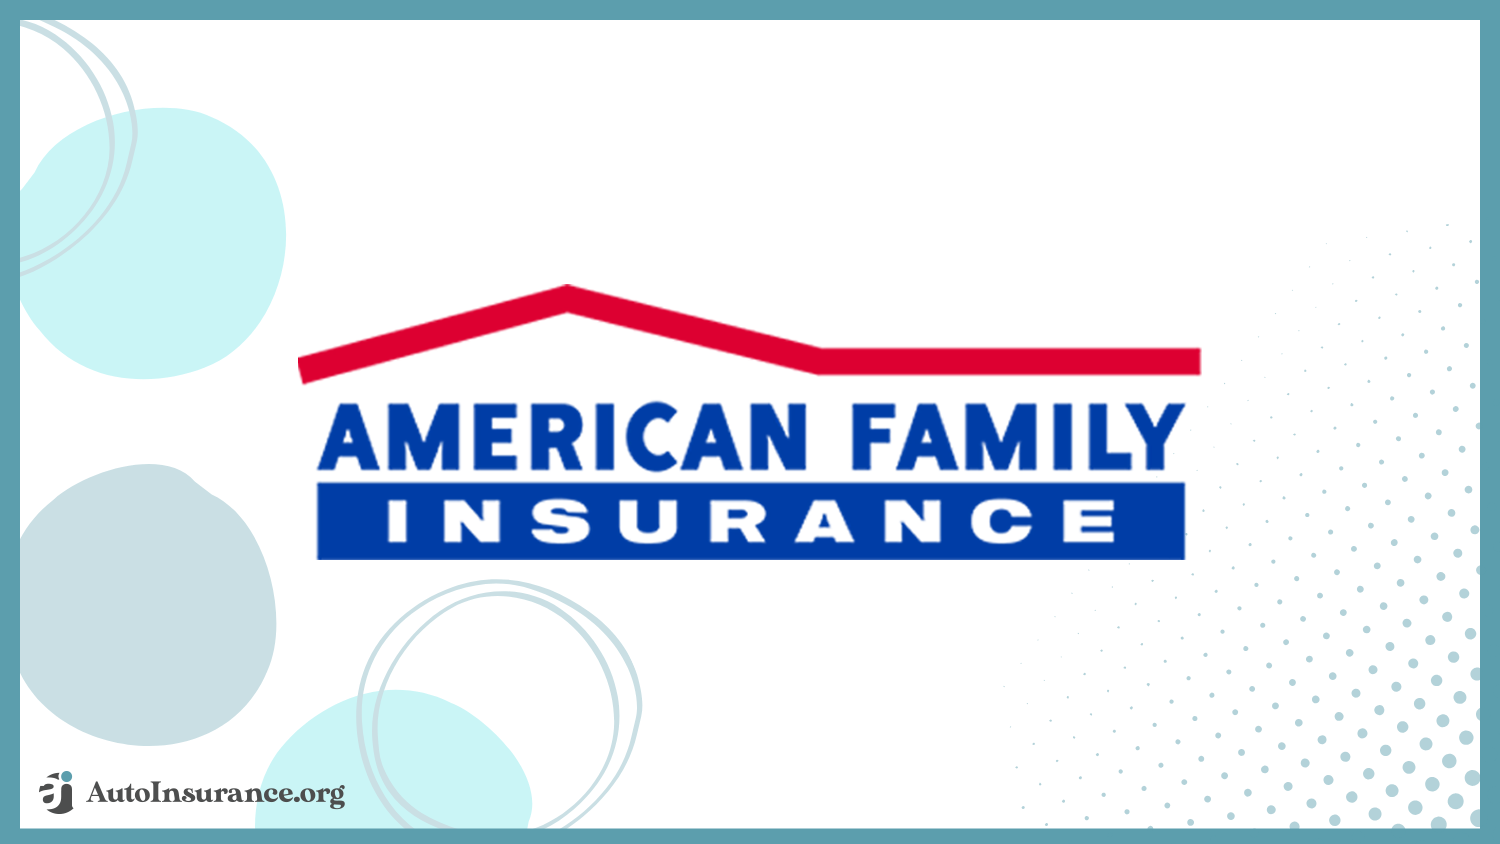 American Family: Best Auto Insurance for Undocumented Immigrants